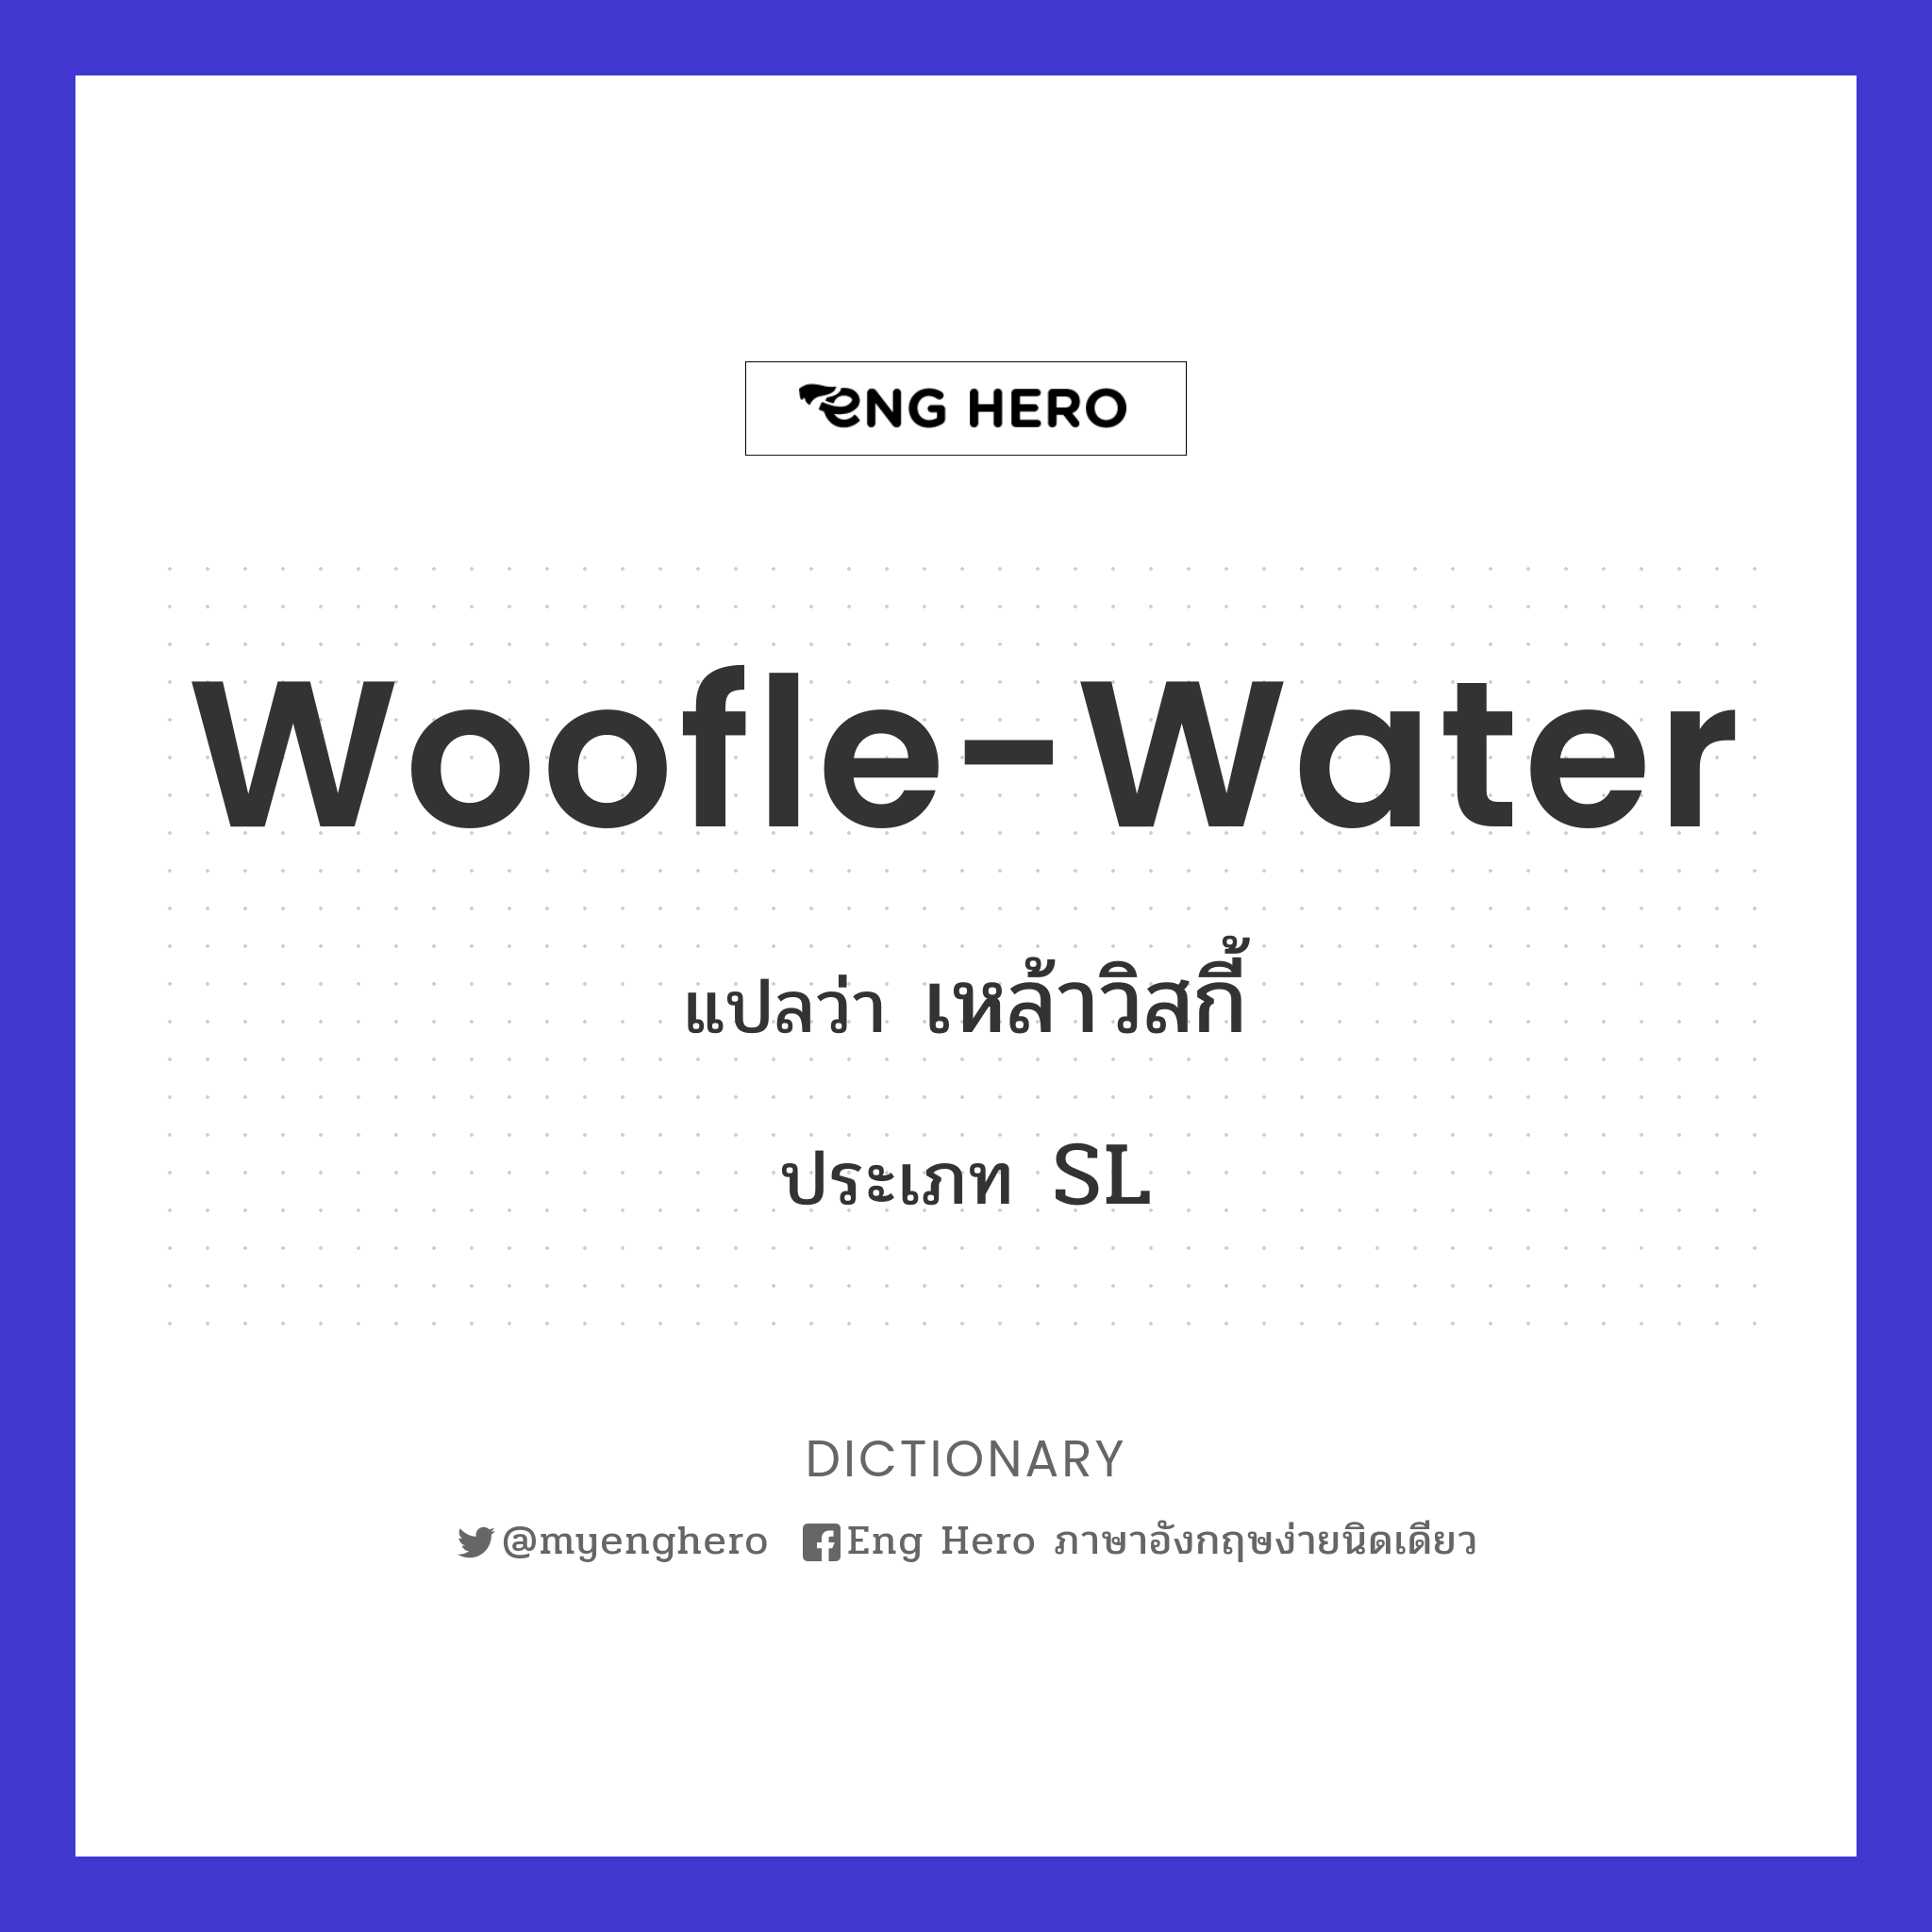 woofle-water